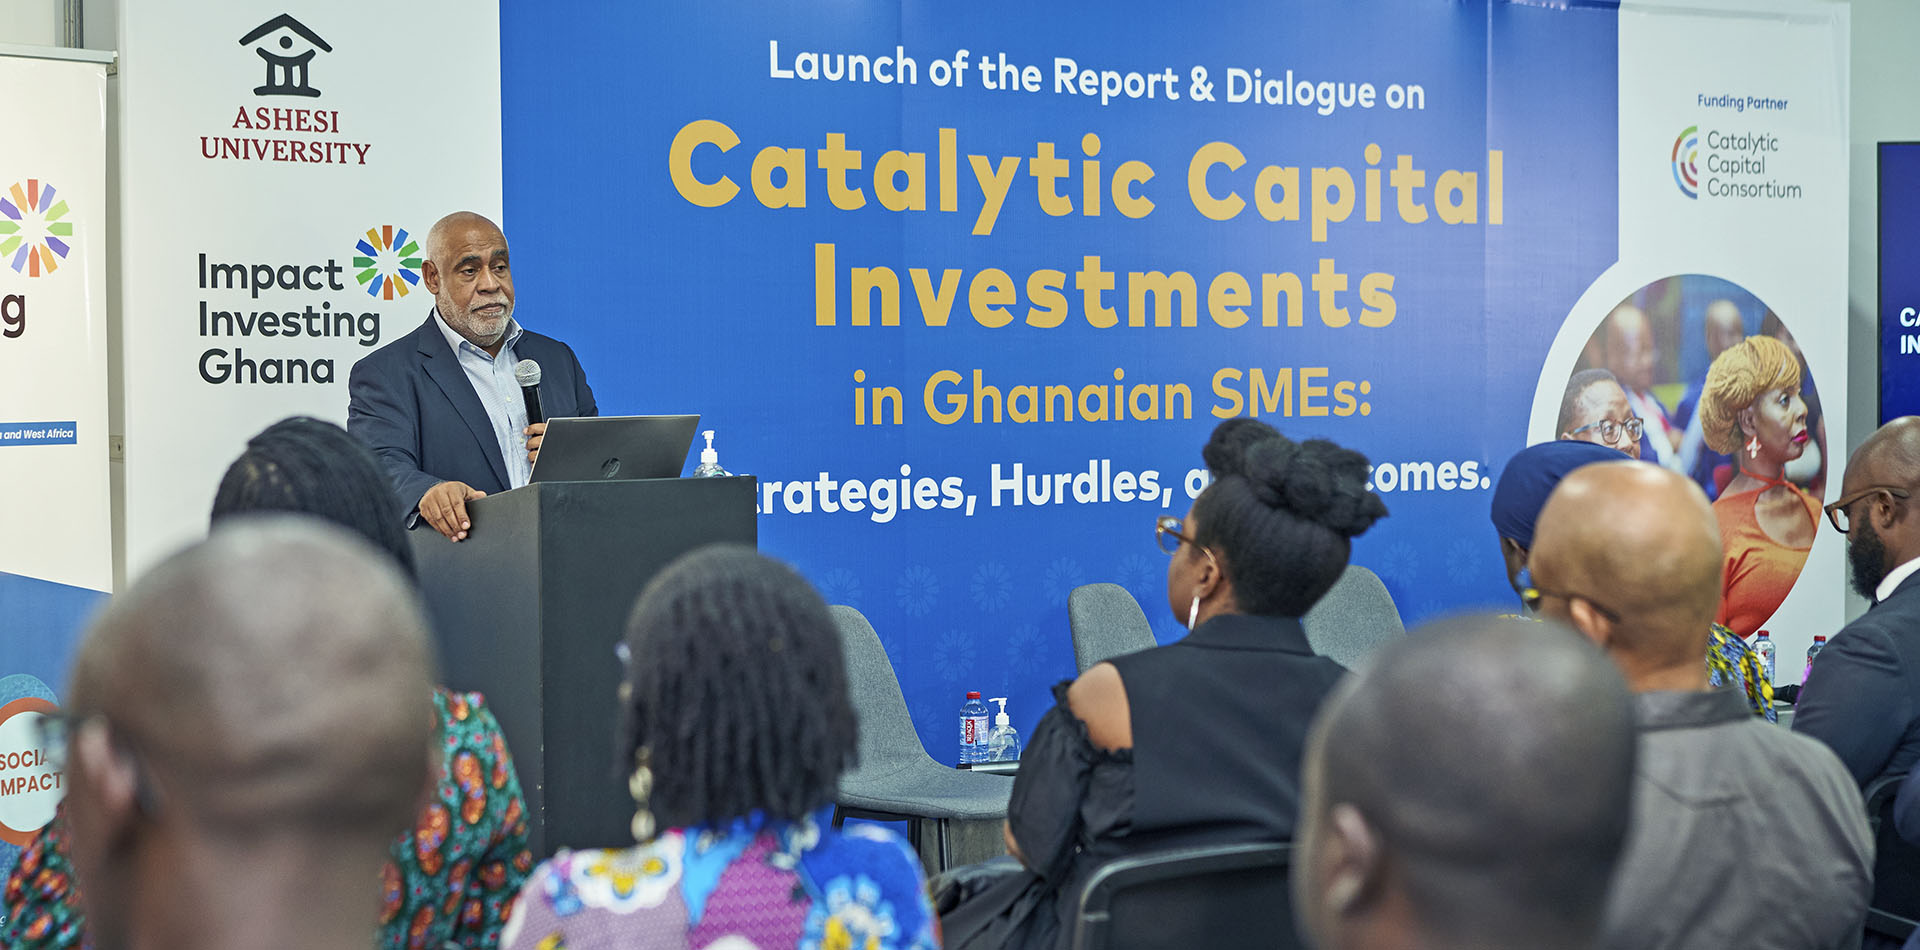 Photo of launch event in Accra for Catalytic Capital report by Ashesi University and Impact Investing Ghana